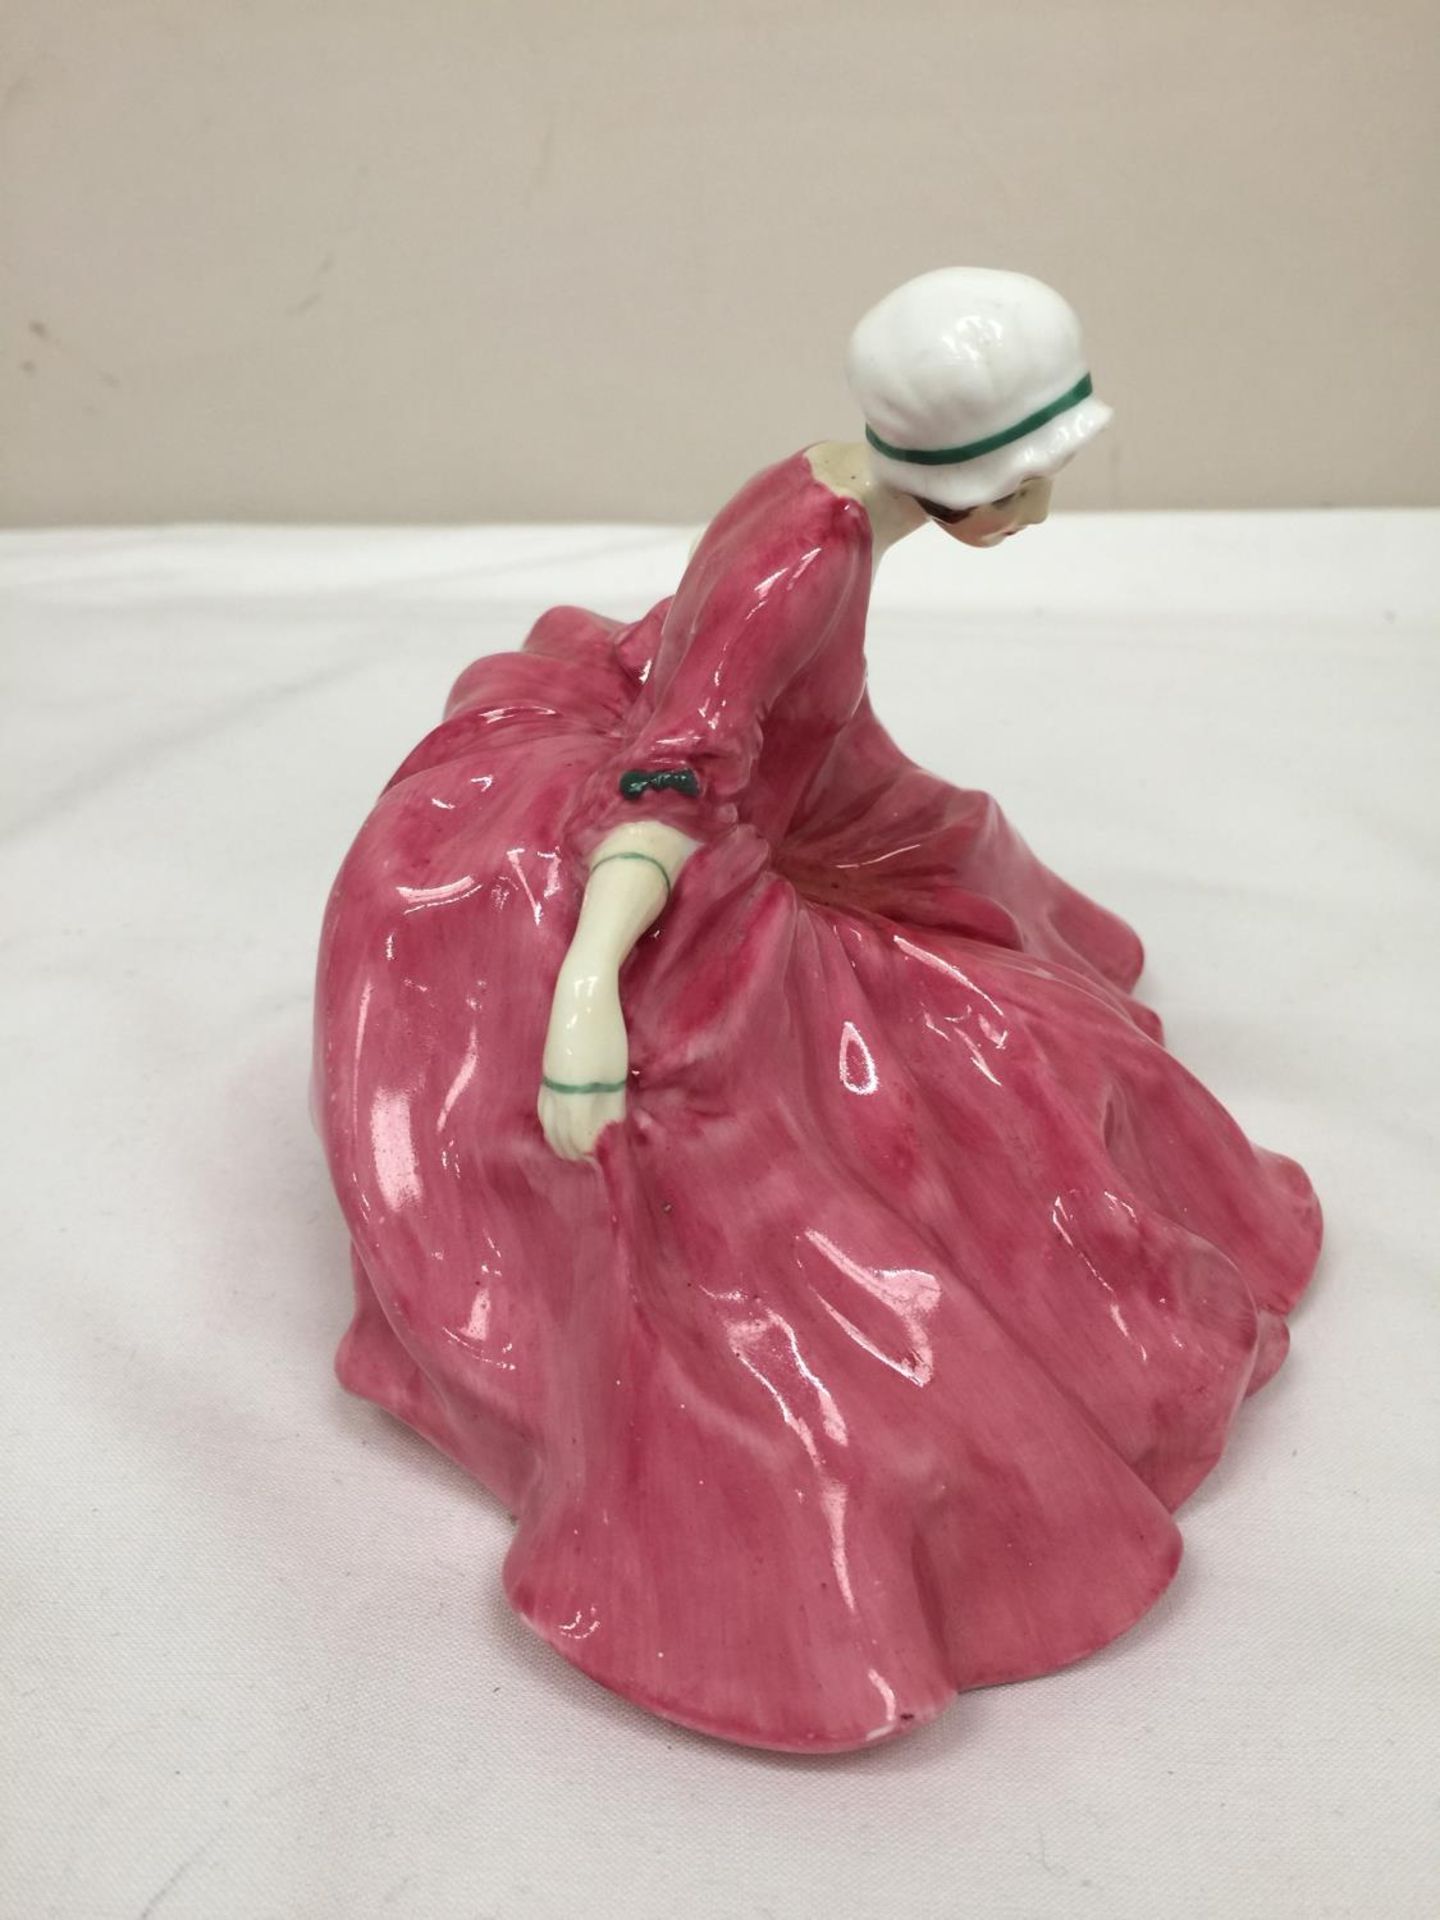 A ROYAL DOULTON FIGURE 'POLLY PEACHAM' HN 549 A/F CRACK TO BASE - Image 2 of 5